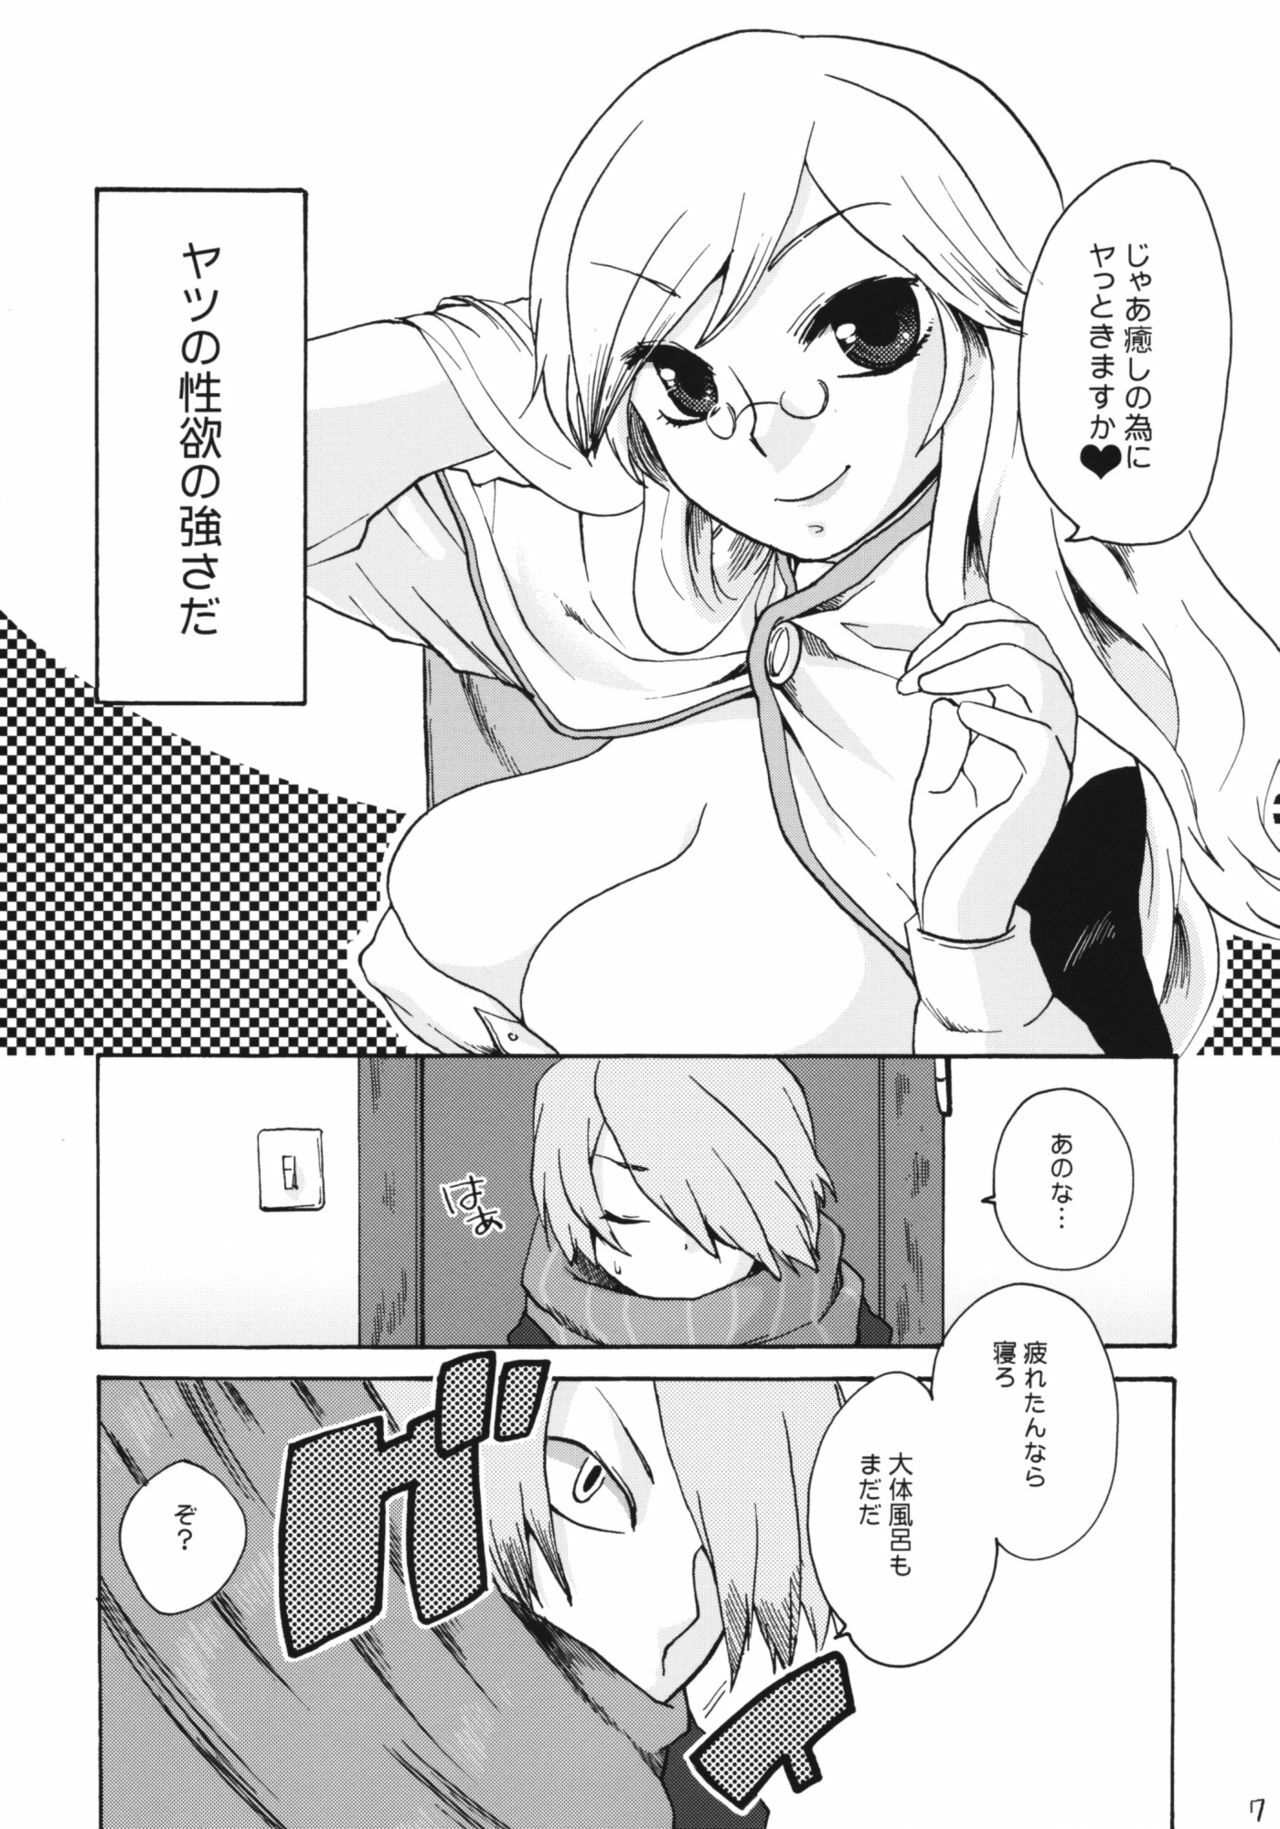 (ComiComi13) [Trip Spider (niwacho)] In You And Me (7th DRAGON) page 6 full